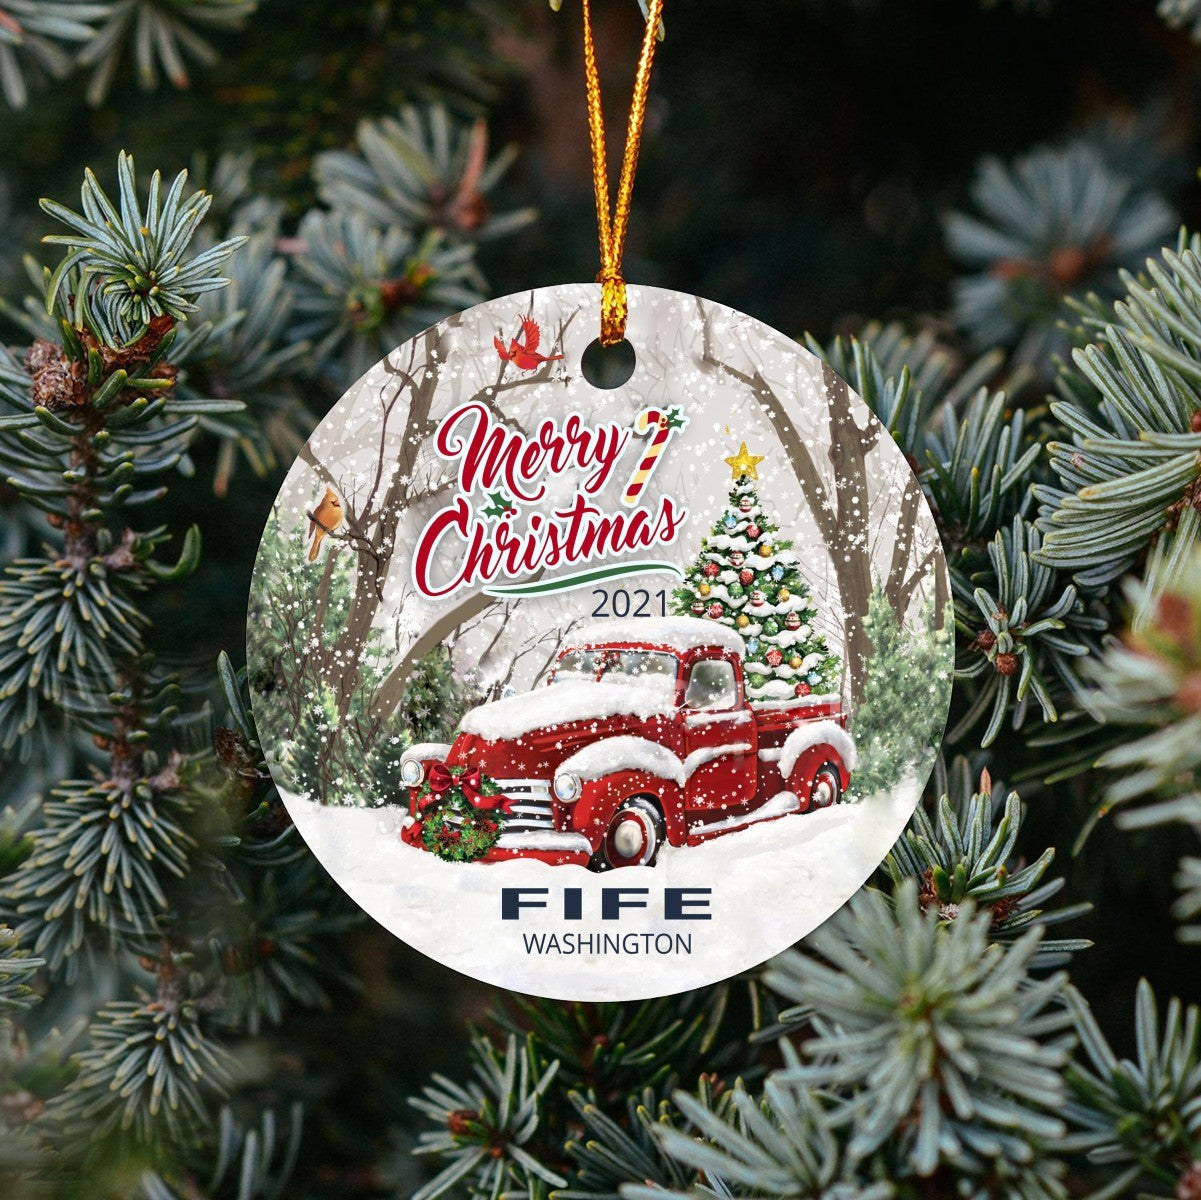 Christmas Tree Ornaments Fife - Ornament With Name City, State Fife Washington WA Ornament - Red Truck Xmas Ornaments 3'' Plastic Gift For Family, Friend And Housewarming